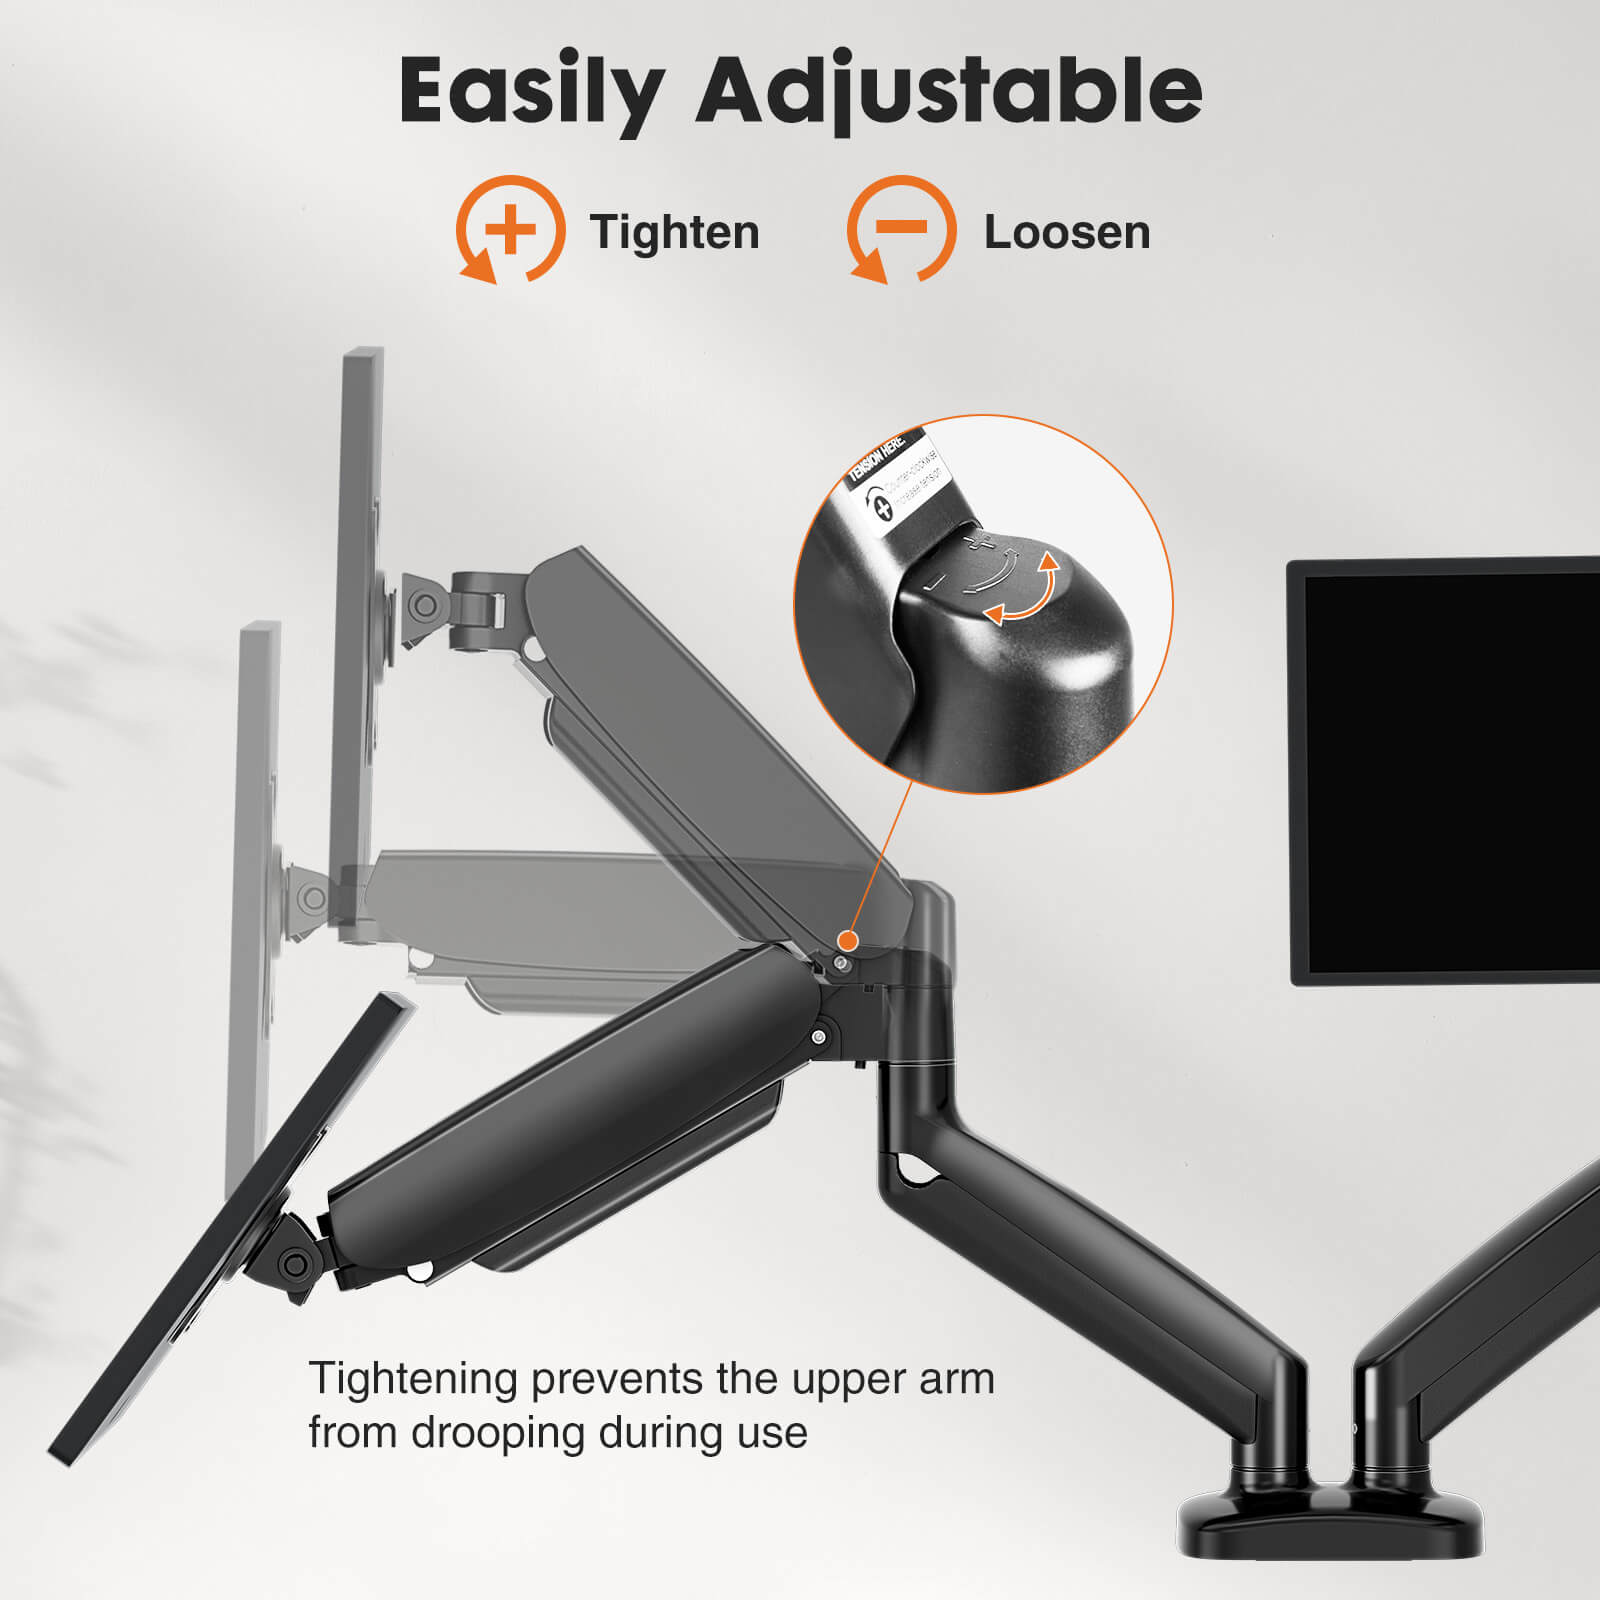 Dual Monitor Stand - Adjustable Gas Spring Monitor Desk Mount Swivel Vesa Bracket with C Clamp, Grommet Mounting Base for 15 to 32 Inch Computer Screens